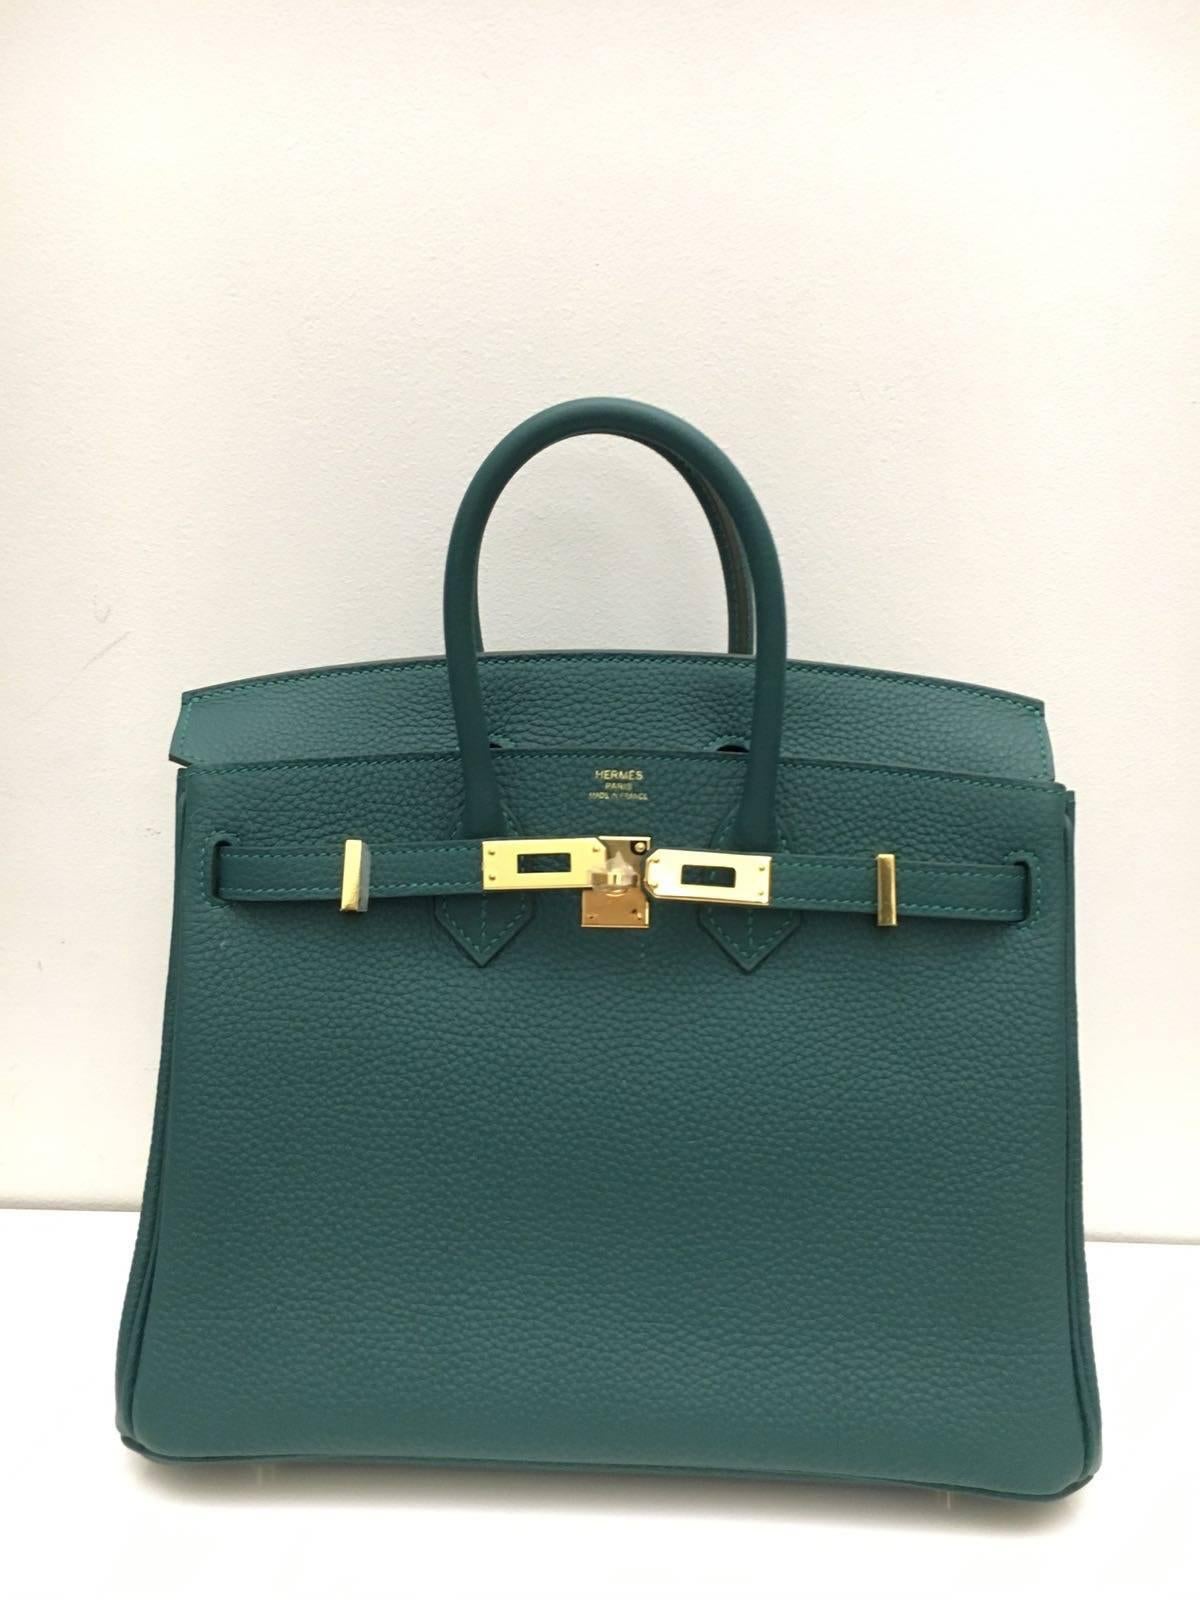 Hermes 
Birkin Size 25
Togo Leather 
Colour Green Malachite
Gold Hardware
Store fresh, comes with receipt and full set (dust bag, box...) 
Hydeparkfashion specializes in sourcing and delivering authentic luxury handbags, mainly Hermes, to clients